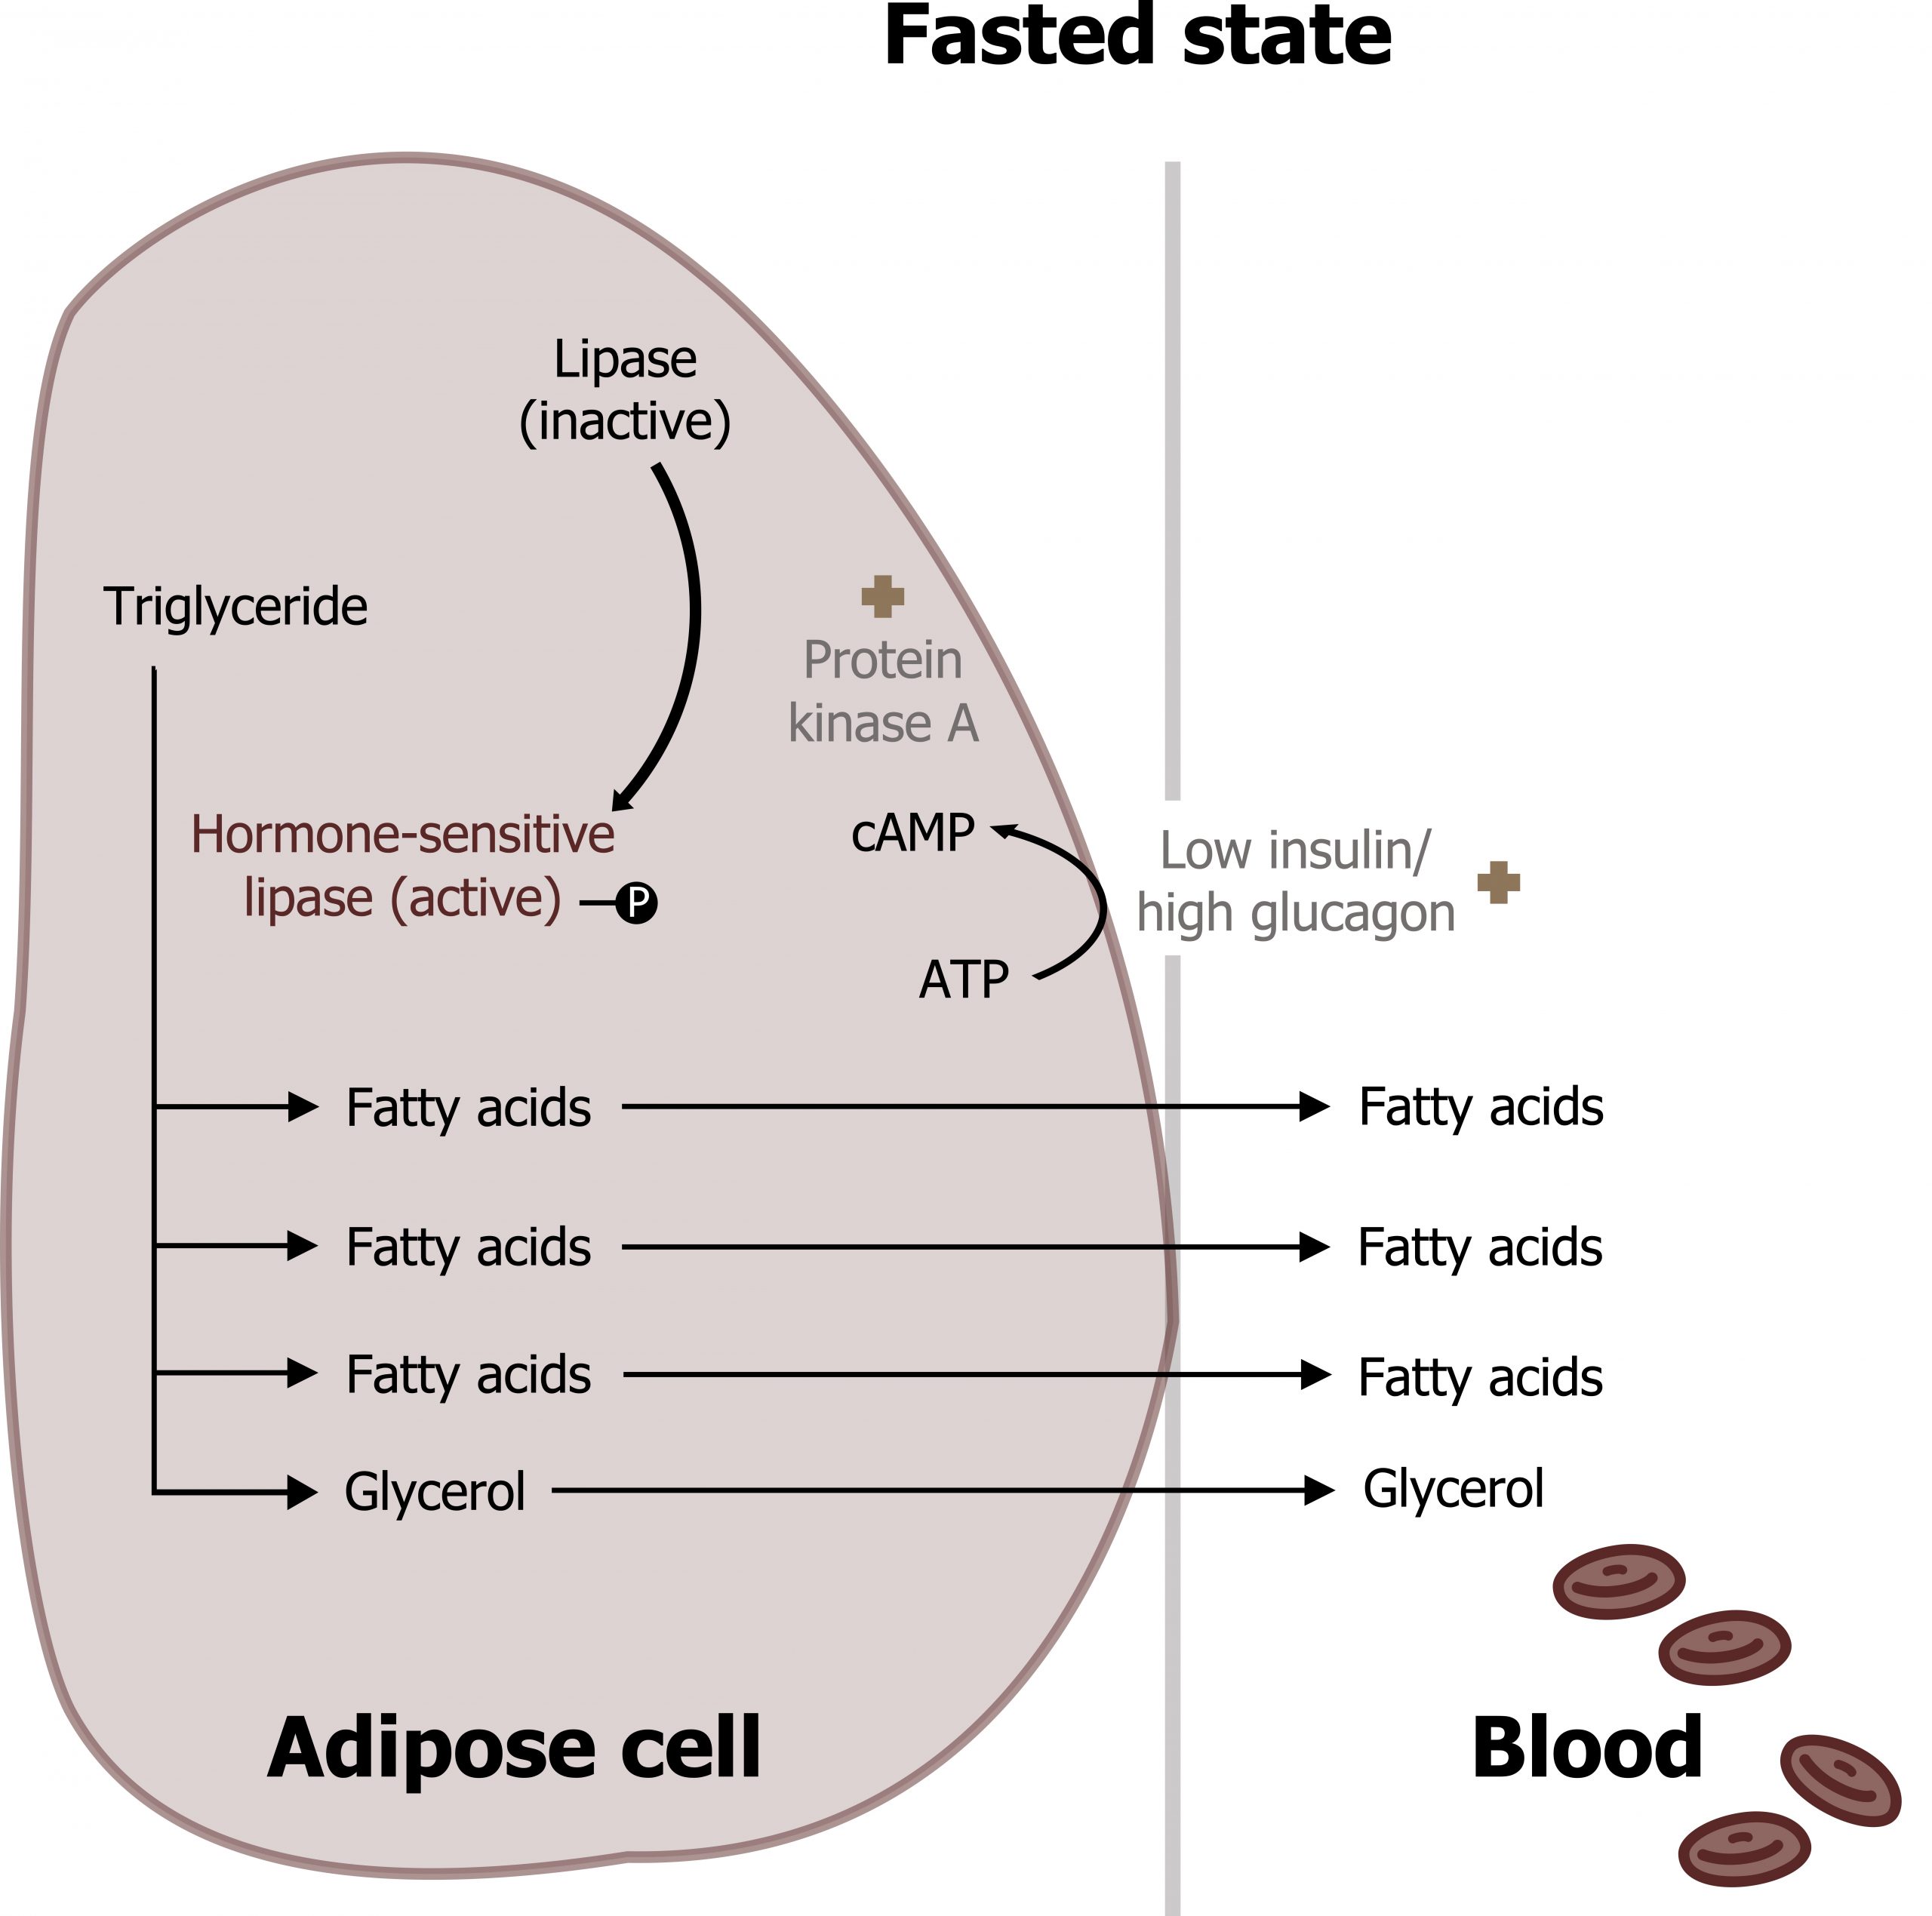 Fasted state has low insulin/high glucagon to activate G-protein coupled receptors. In the adipose cell, lipase (inactive) arrow hormone-sensitive lipase (active). Triglyceride arrow with hormone-sensitive lipase to fatty acids, fatty acids, fatty acids, and glycerol which move outside of the cell to the blood